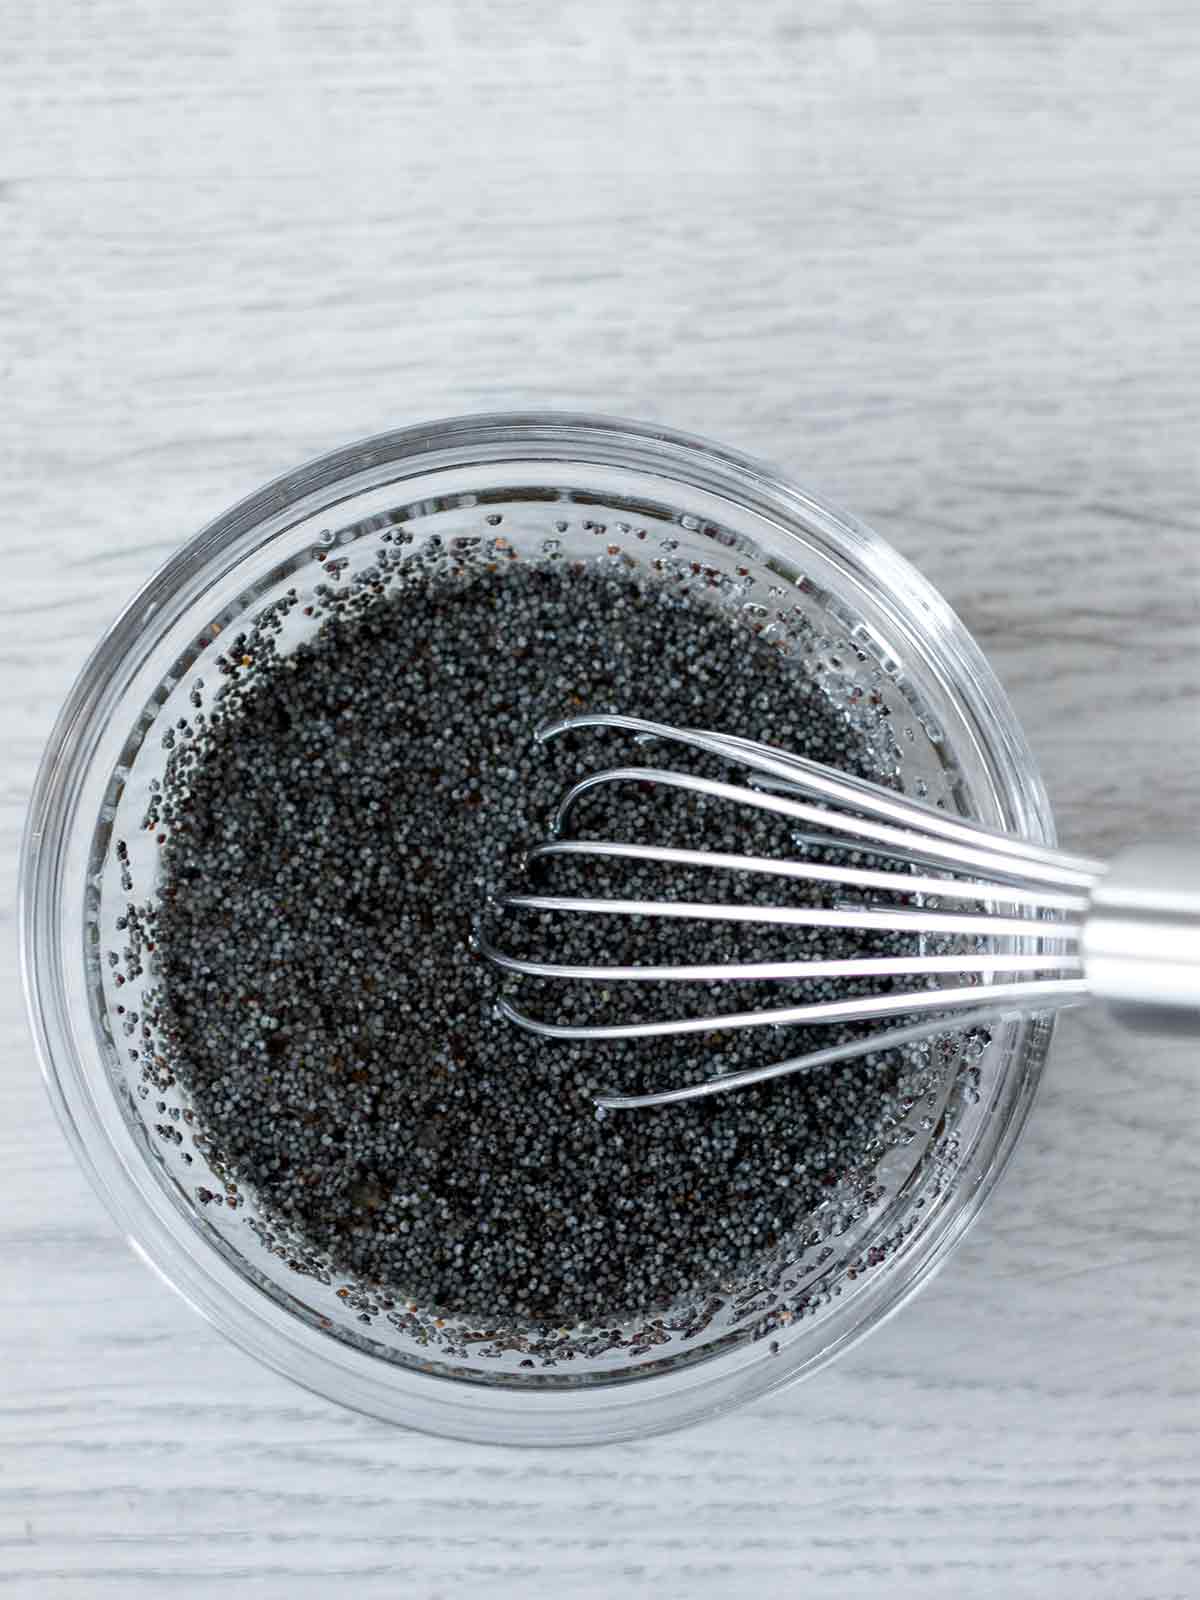 Simple homemade lemon maple poppy seed dressing in a small bowl with a whisk